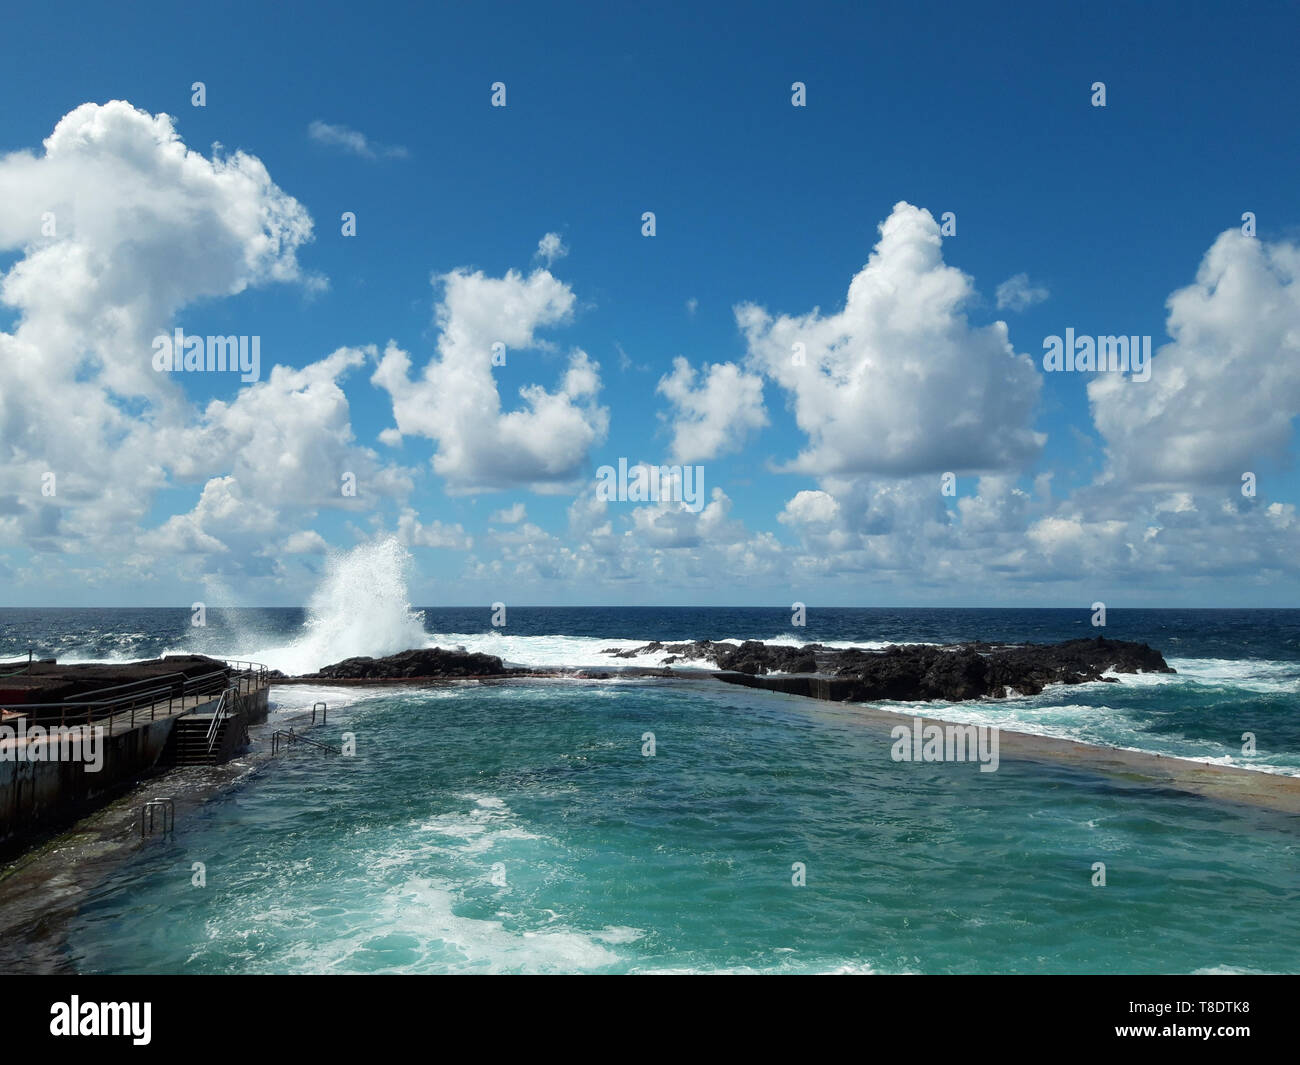 ocean wave splash on rocks at coast on a sunny day with blue sky Stock Photo